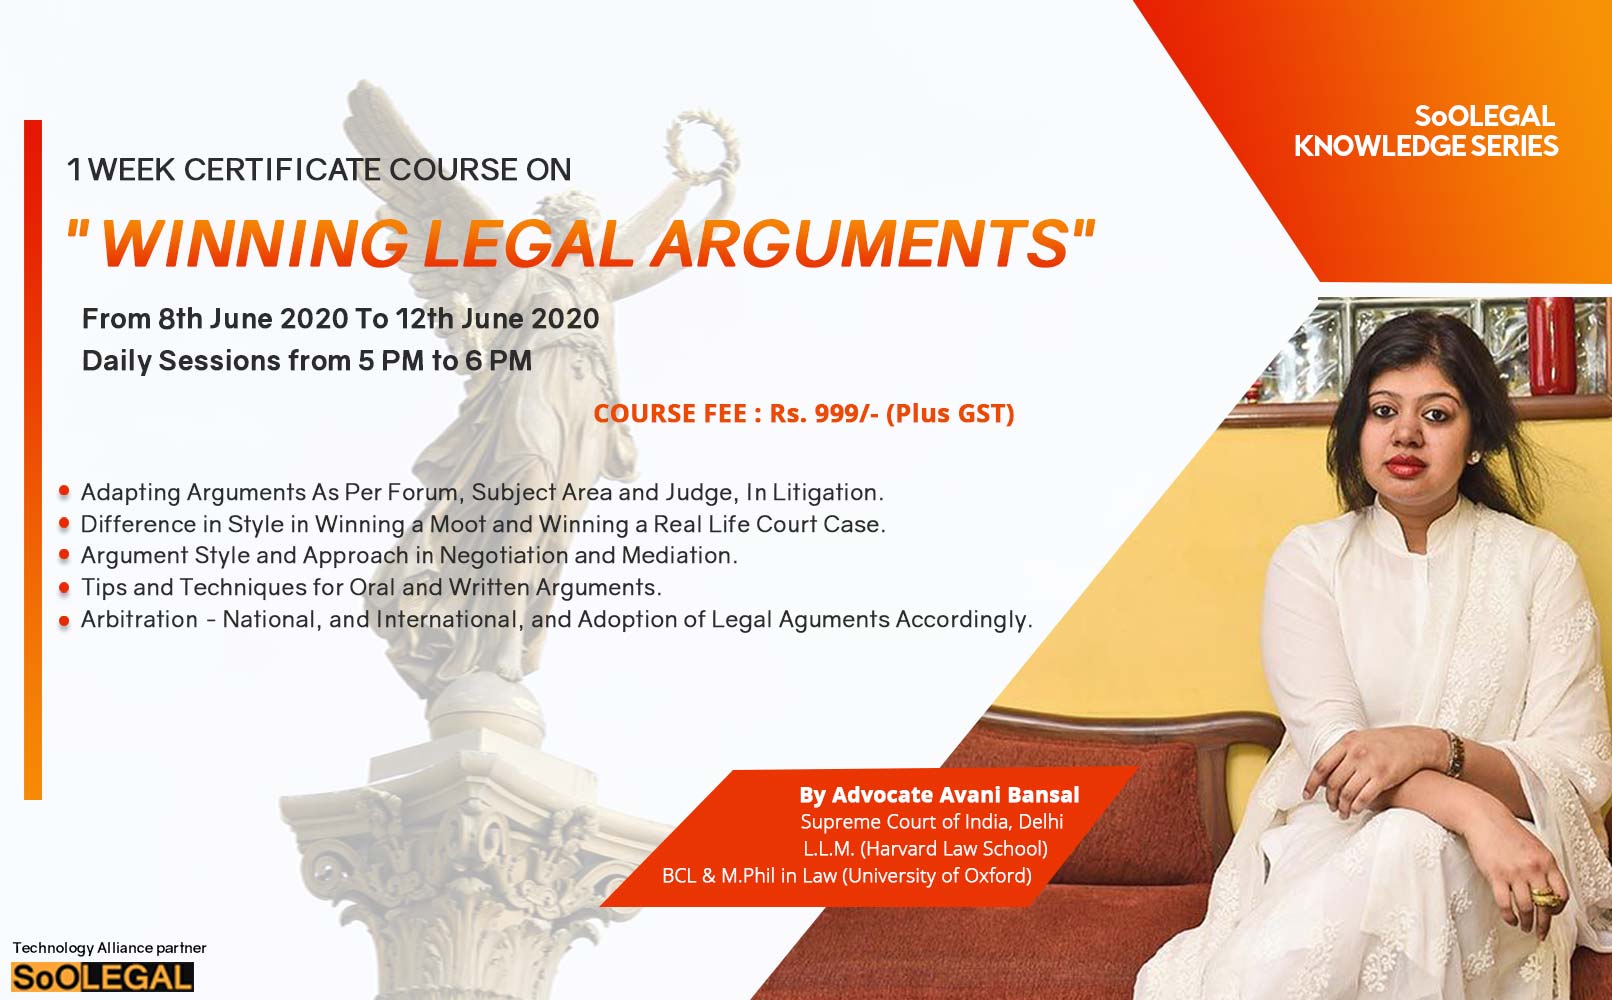 1 WEEK CERTIFICATE COURSE ON: WINNING LEGAL ARGUMENTS